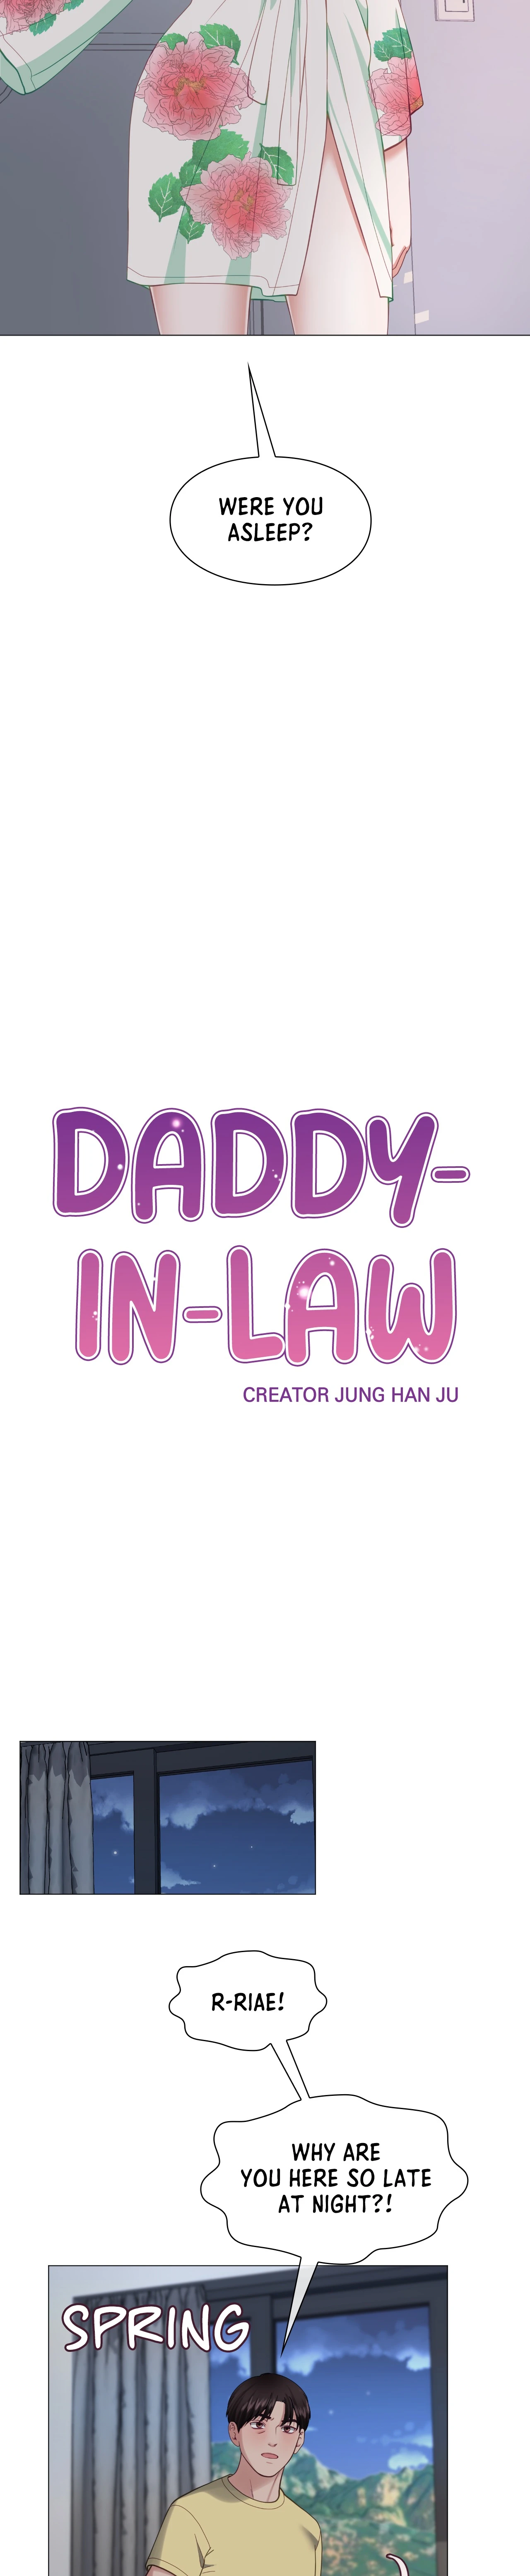 Daddy-in-law image